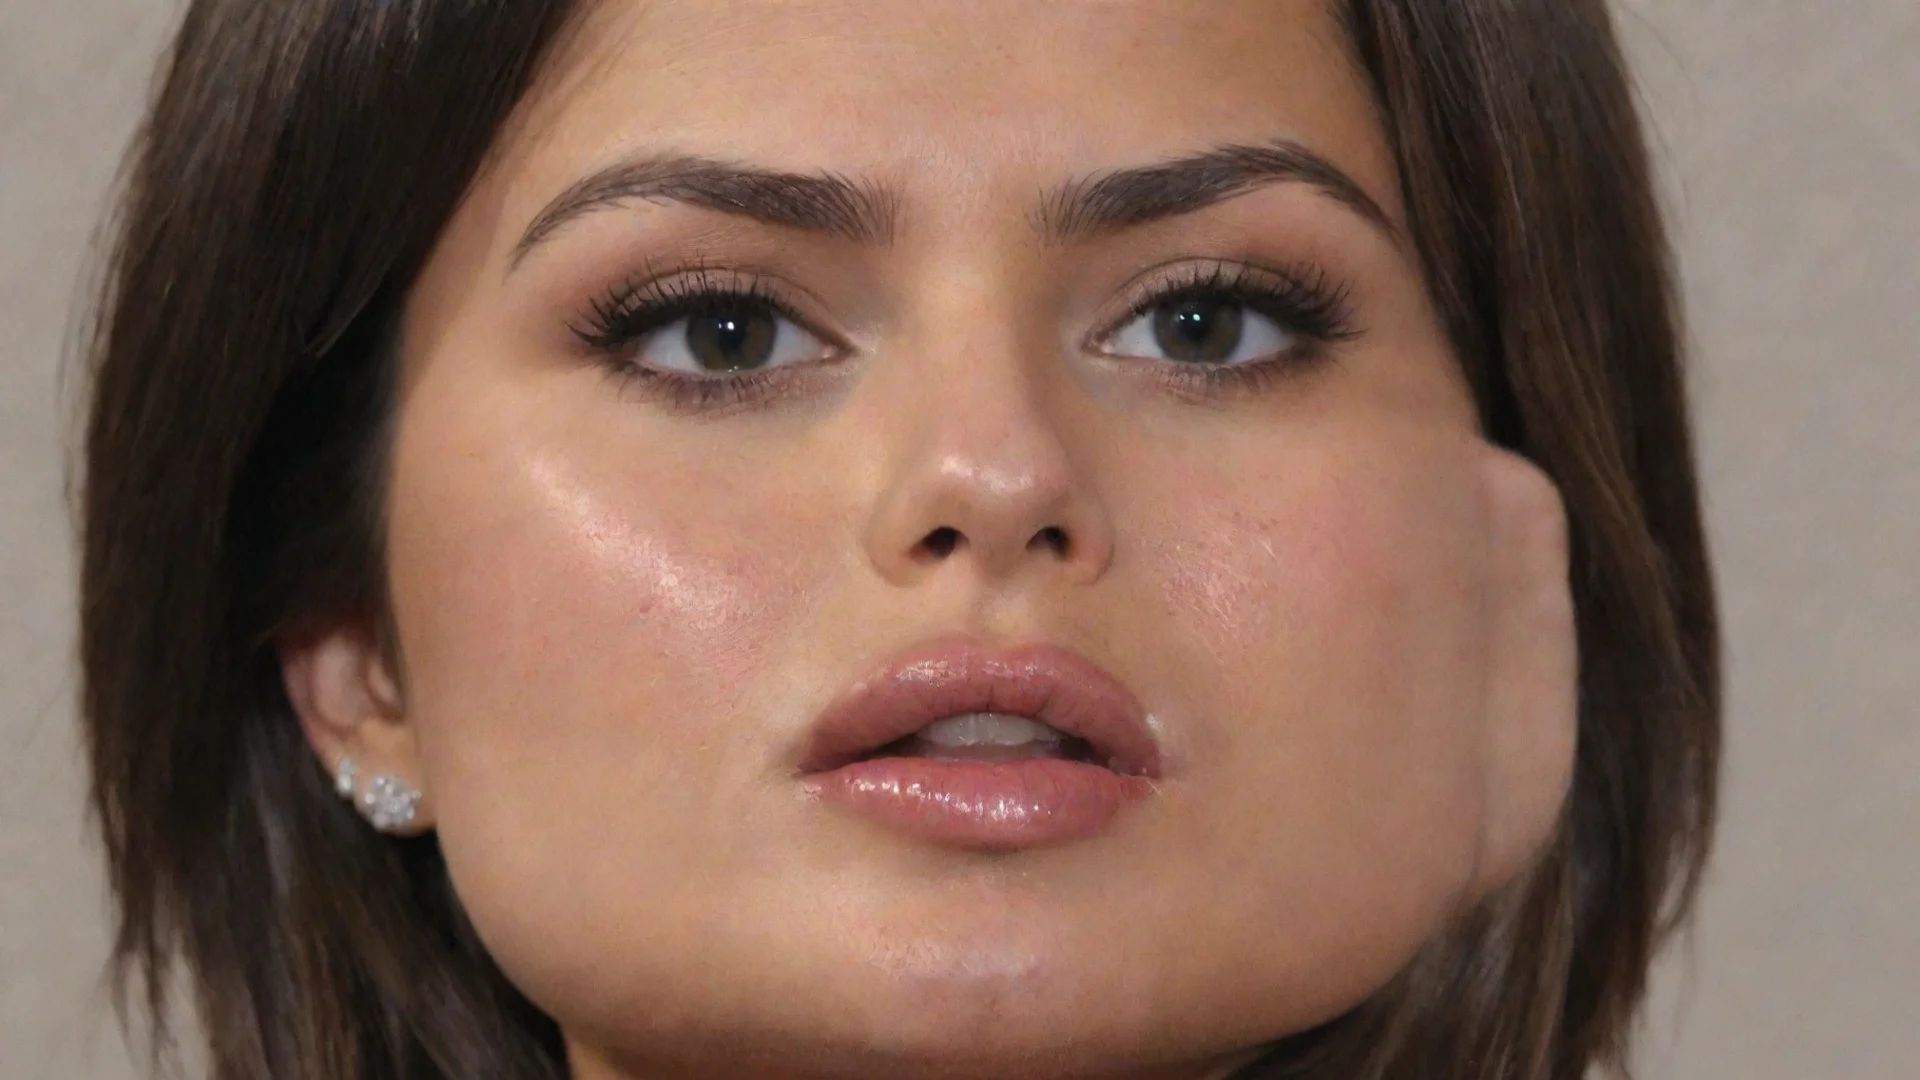 amazing selena gomez %252c sperm in her face  awesome portrait 2 wide